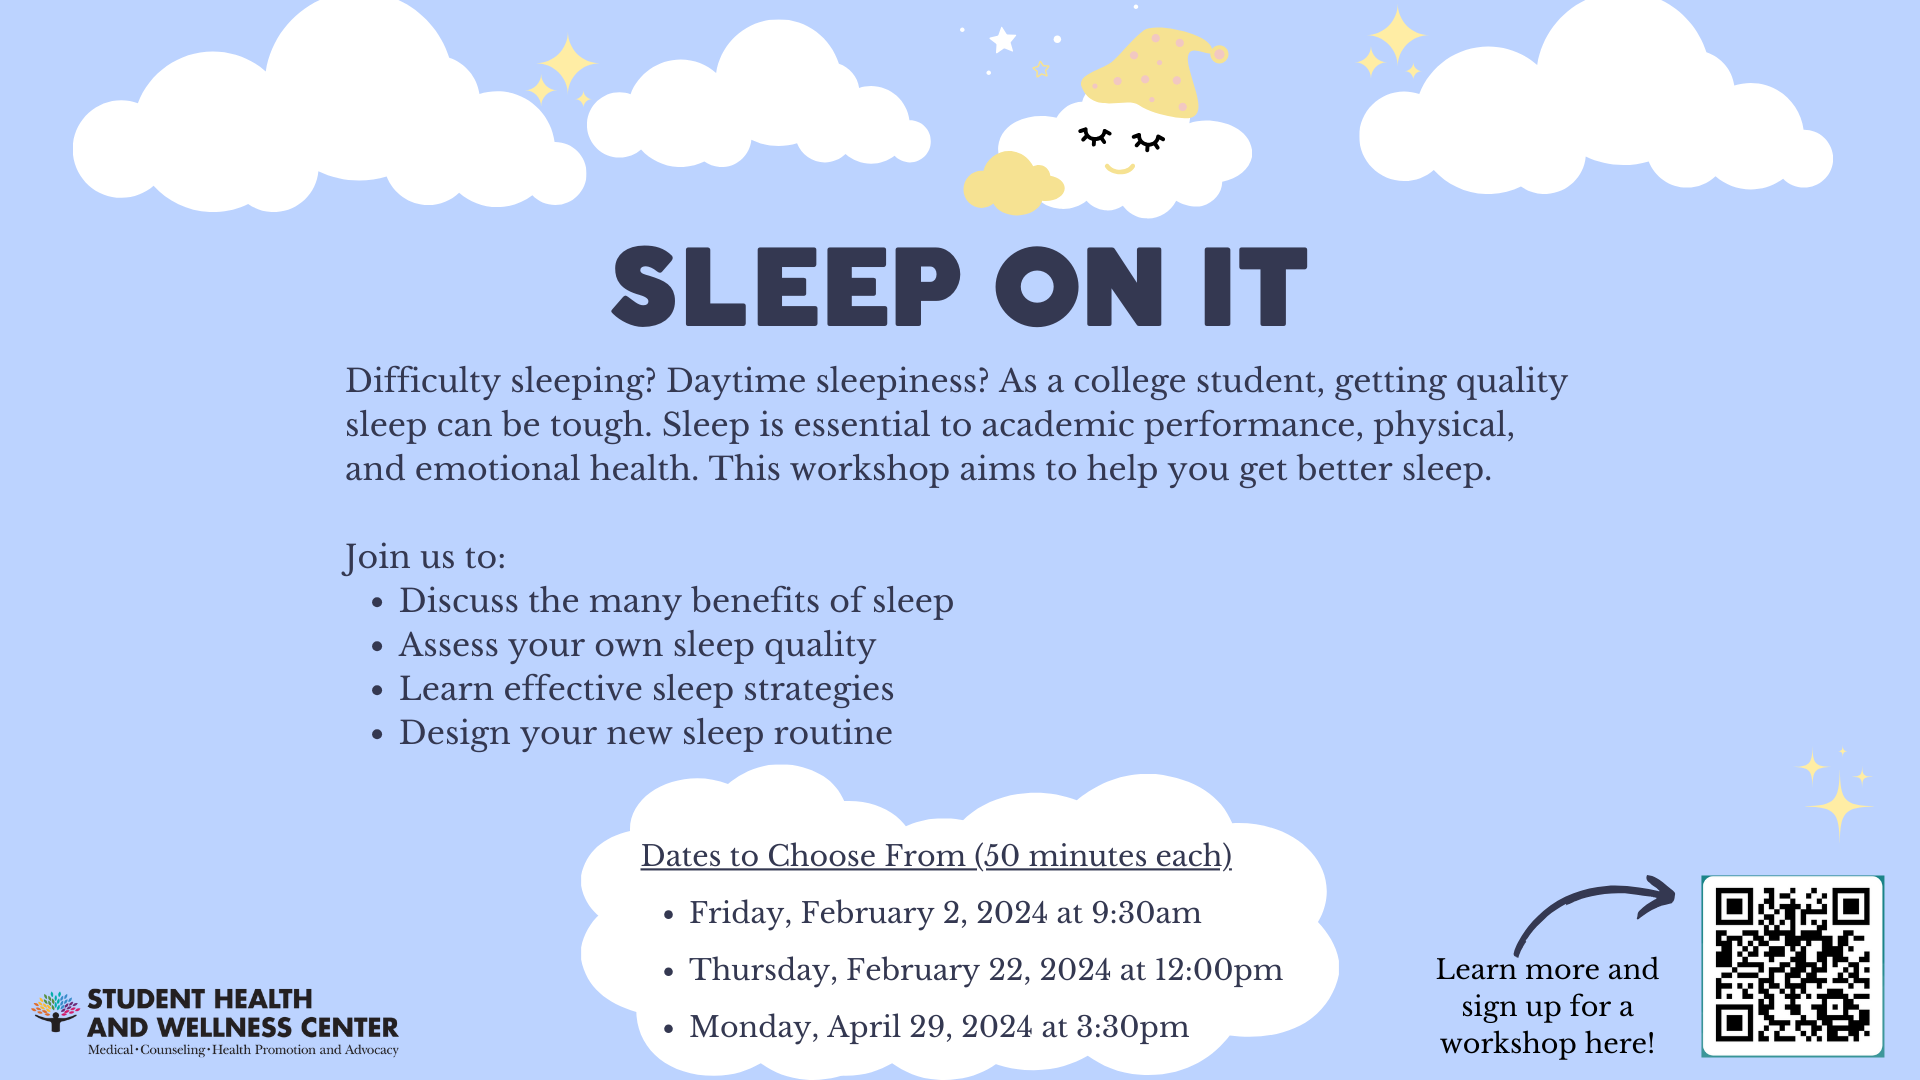 An event to help college students learn about healthy sleep habits